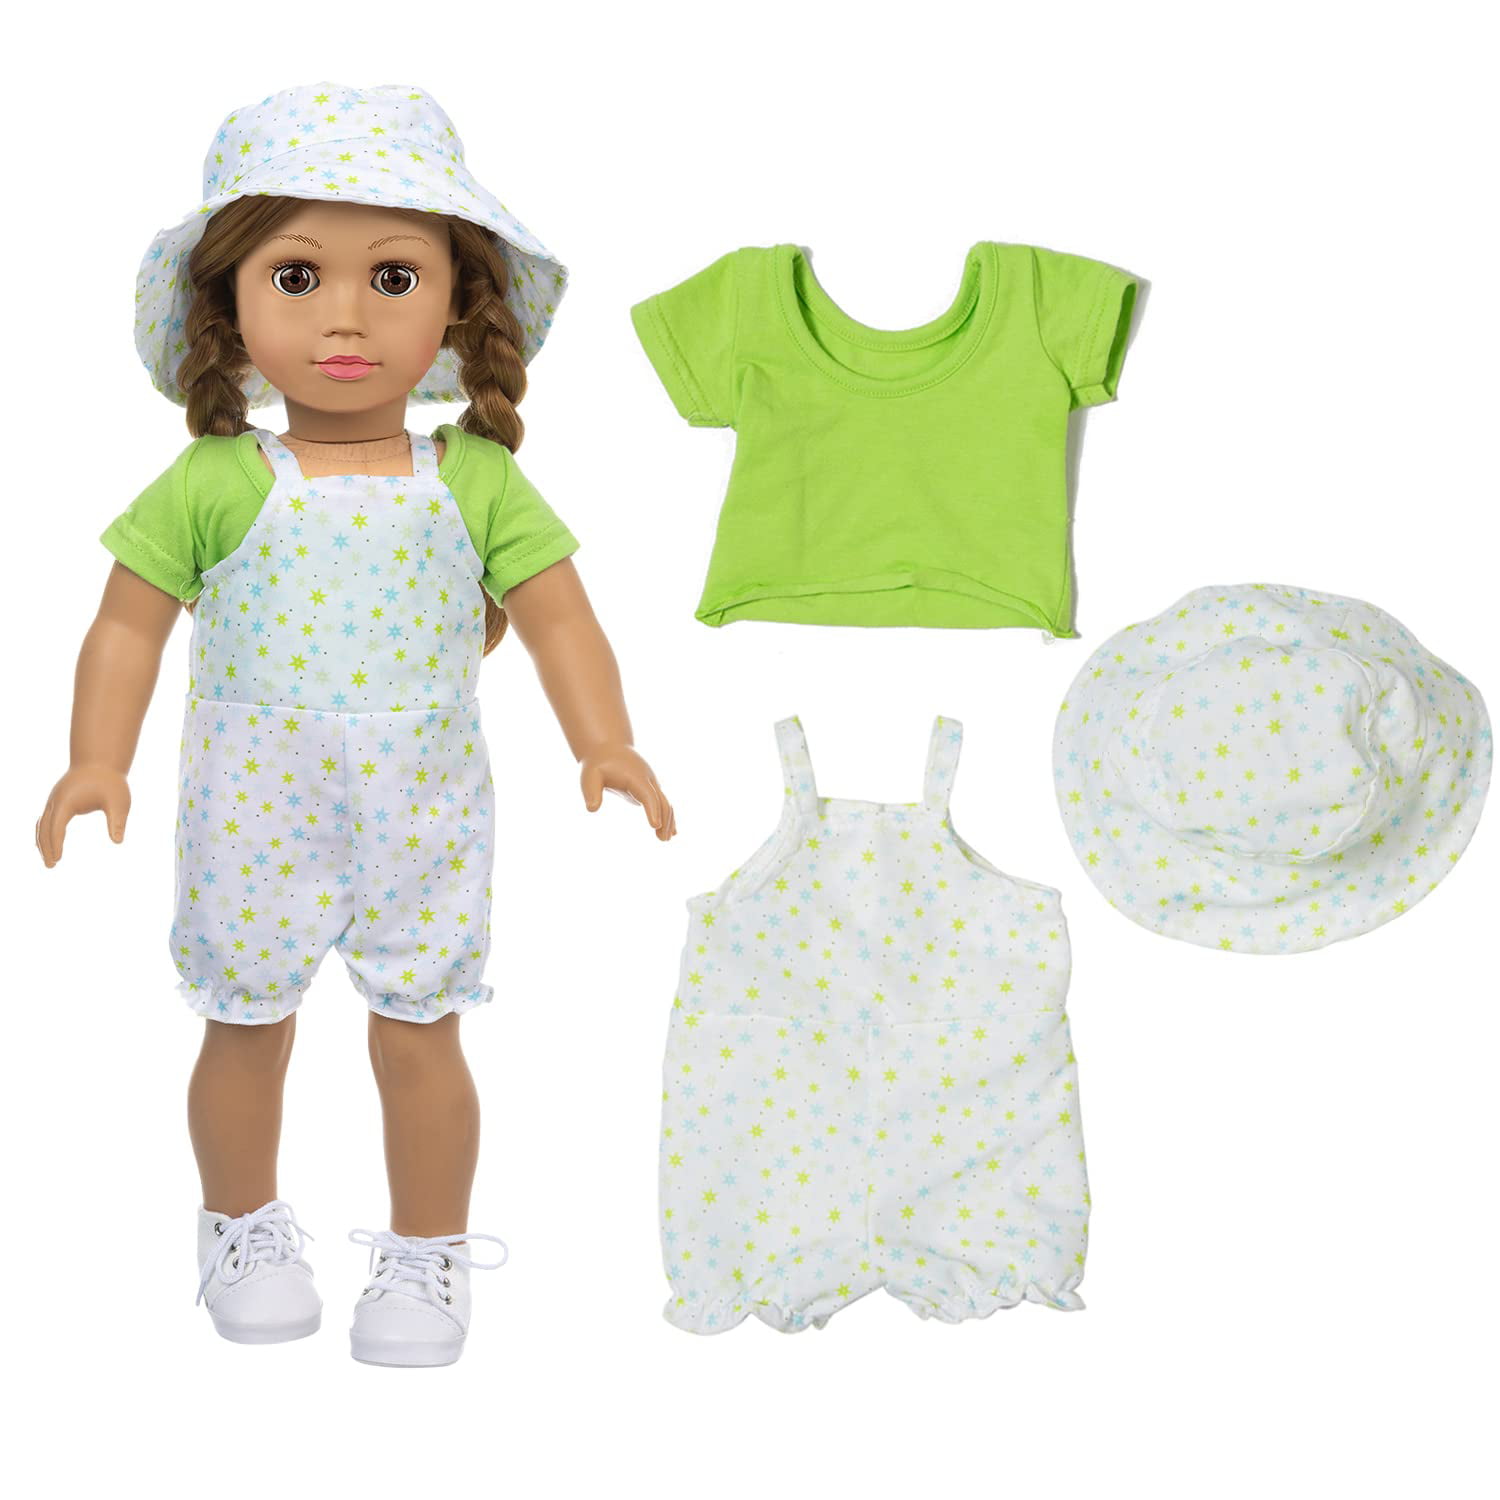 XFEYUE 18 Inch Doll Clothes and Accessories 5 Sets Doll Clothes